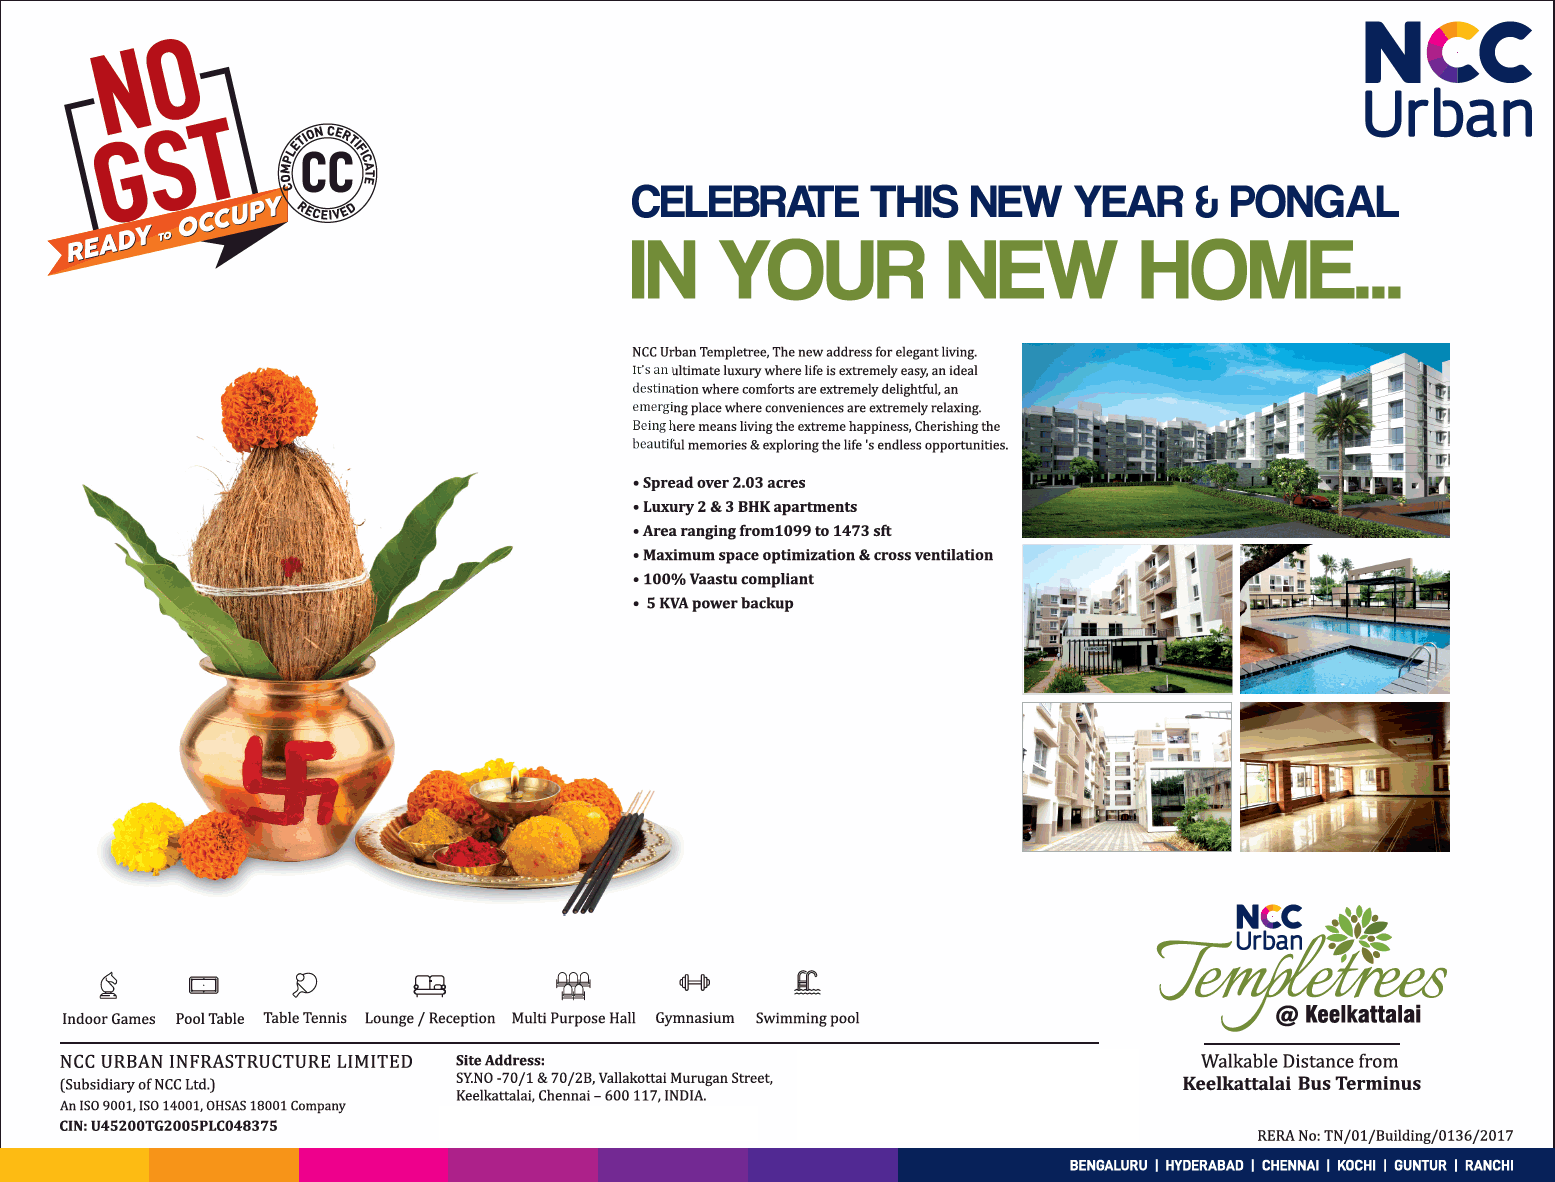 Luxury 2 & 3 BHK apartments at NCC Urban Temple Trees in Chennai Update